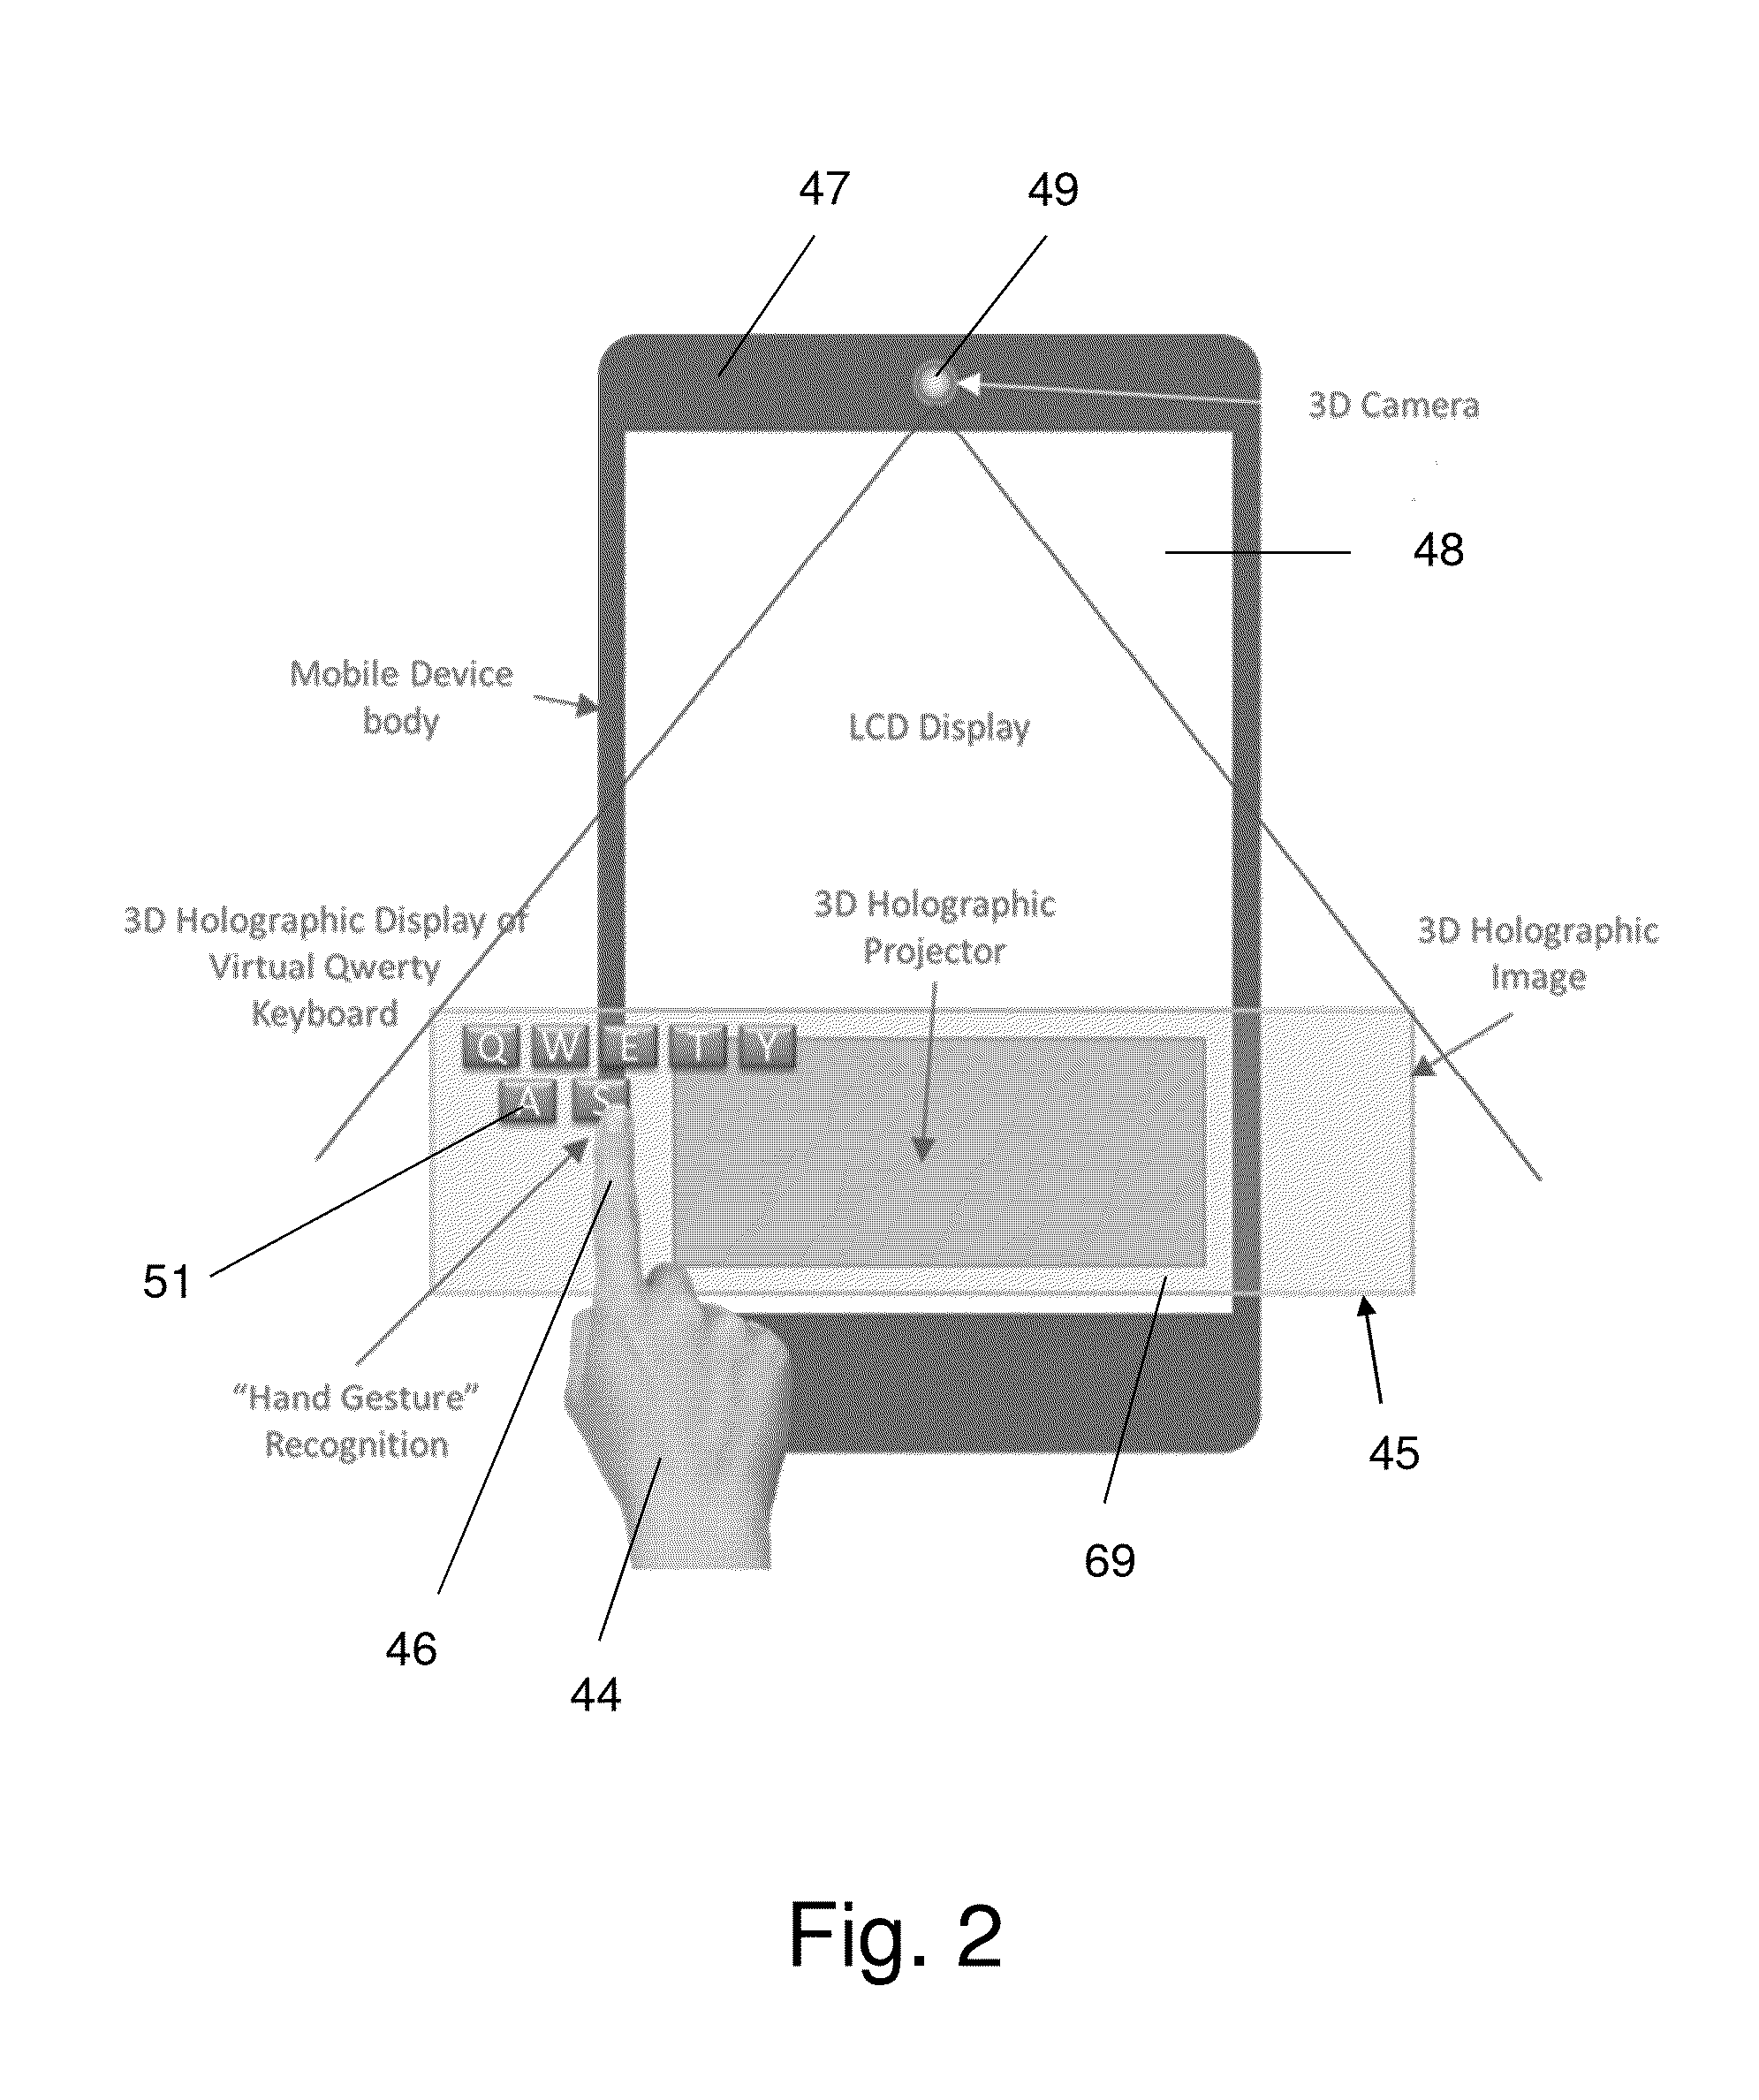 System for generating and controlling a variably displayable mobile device keypad/virtual keyboard